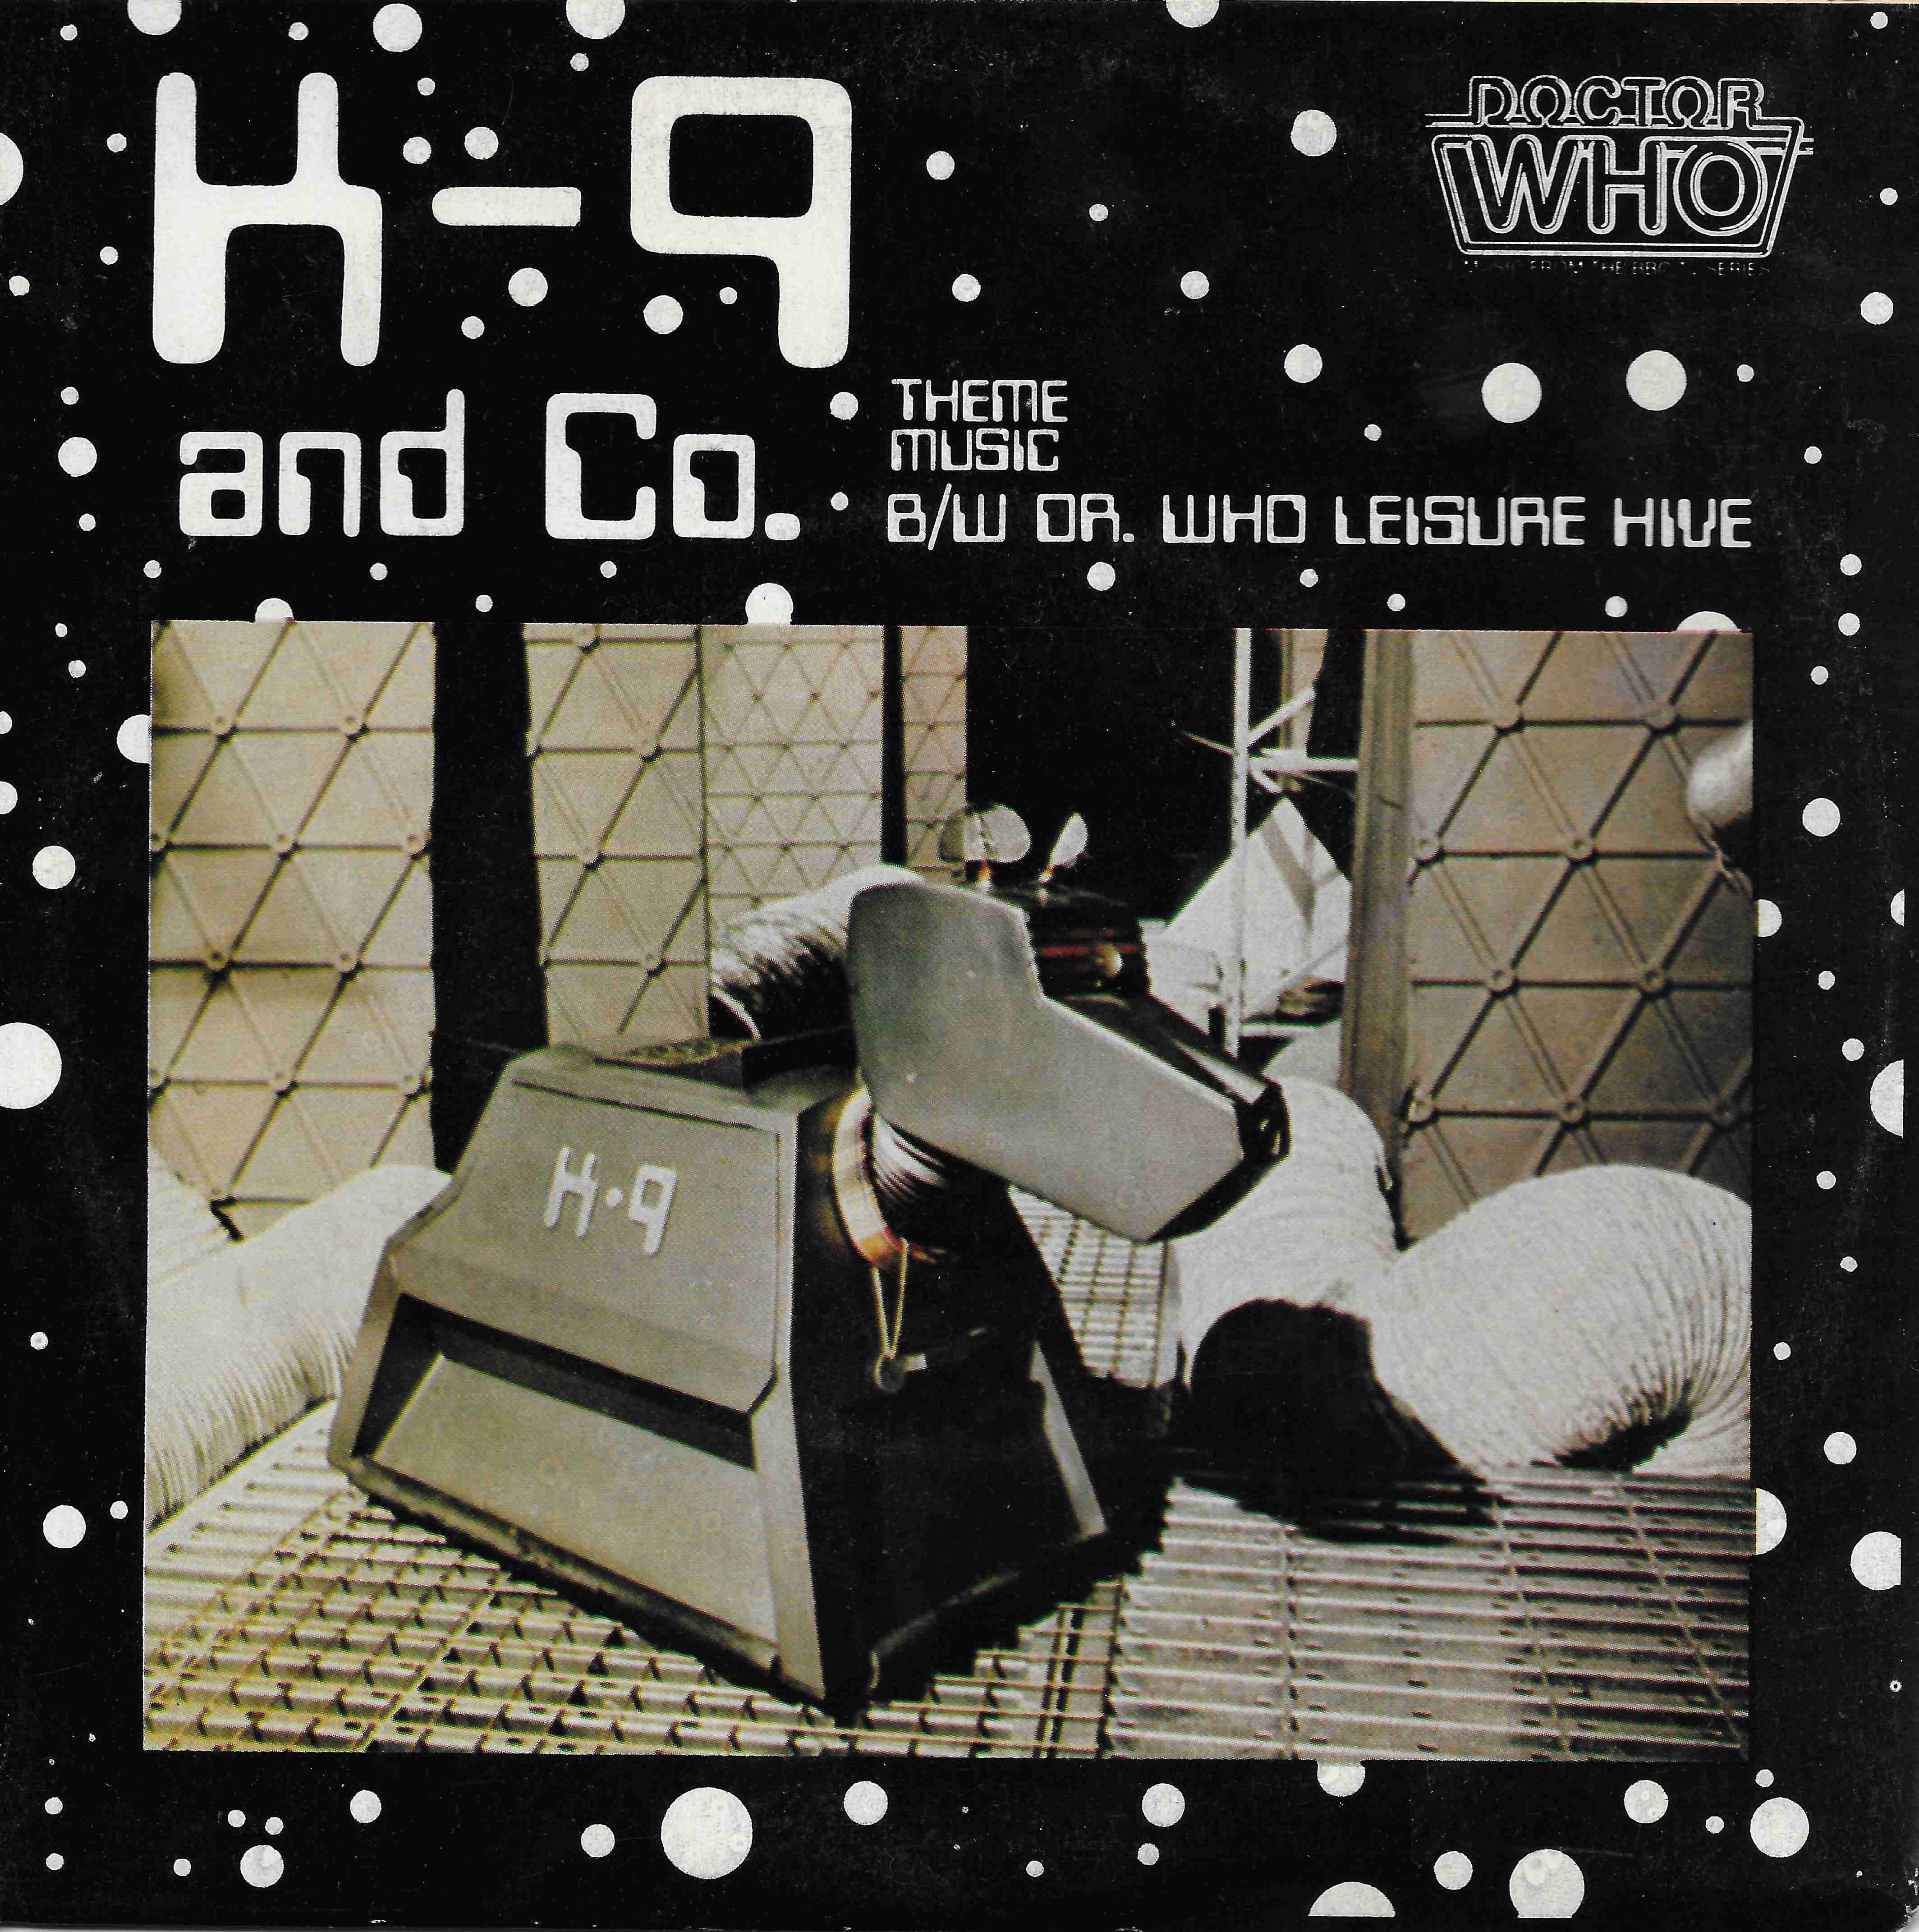 Picture of BBC - 456 K-9 and Co. by artist Flachra Trench / Ian Levine from the BBC records and Tapes library